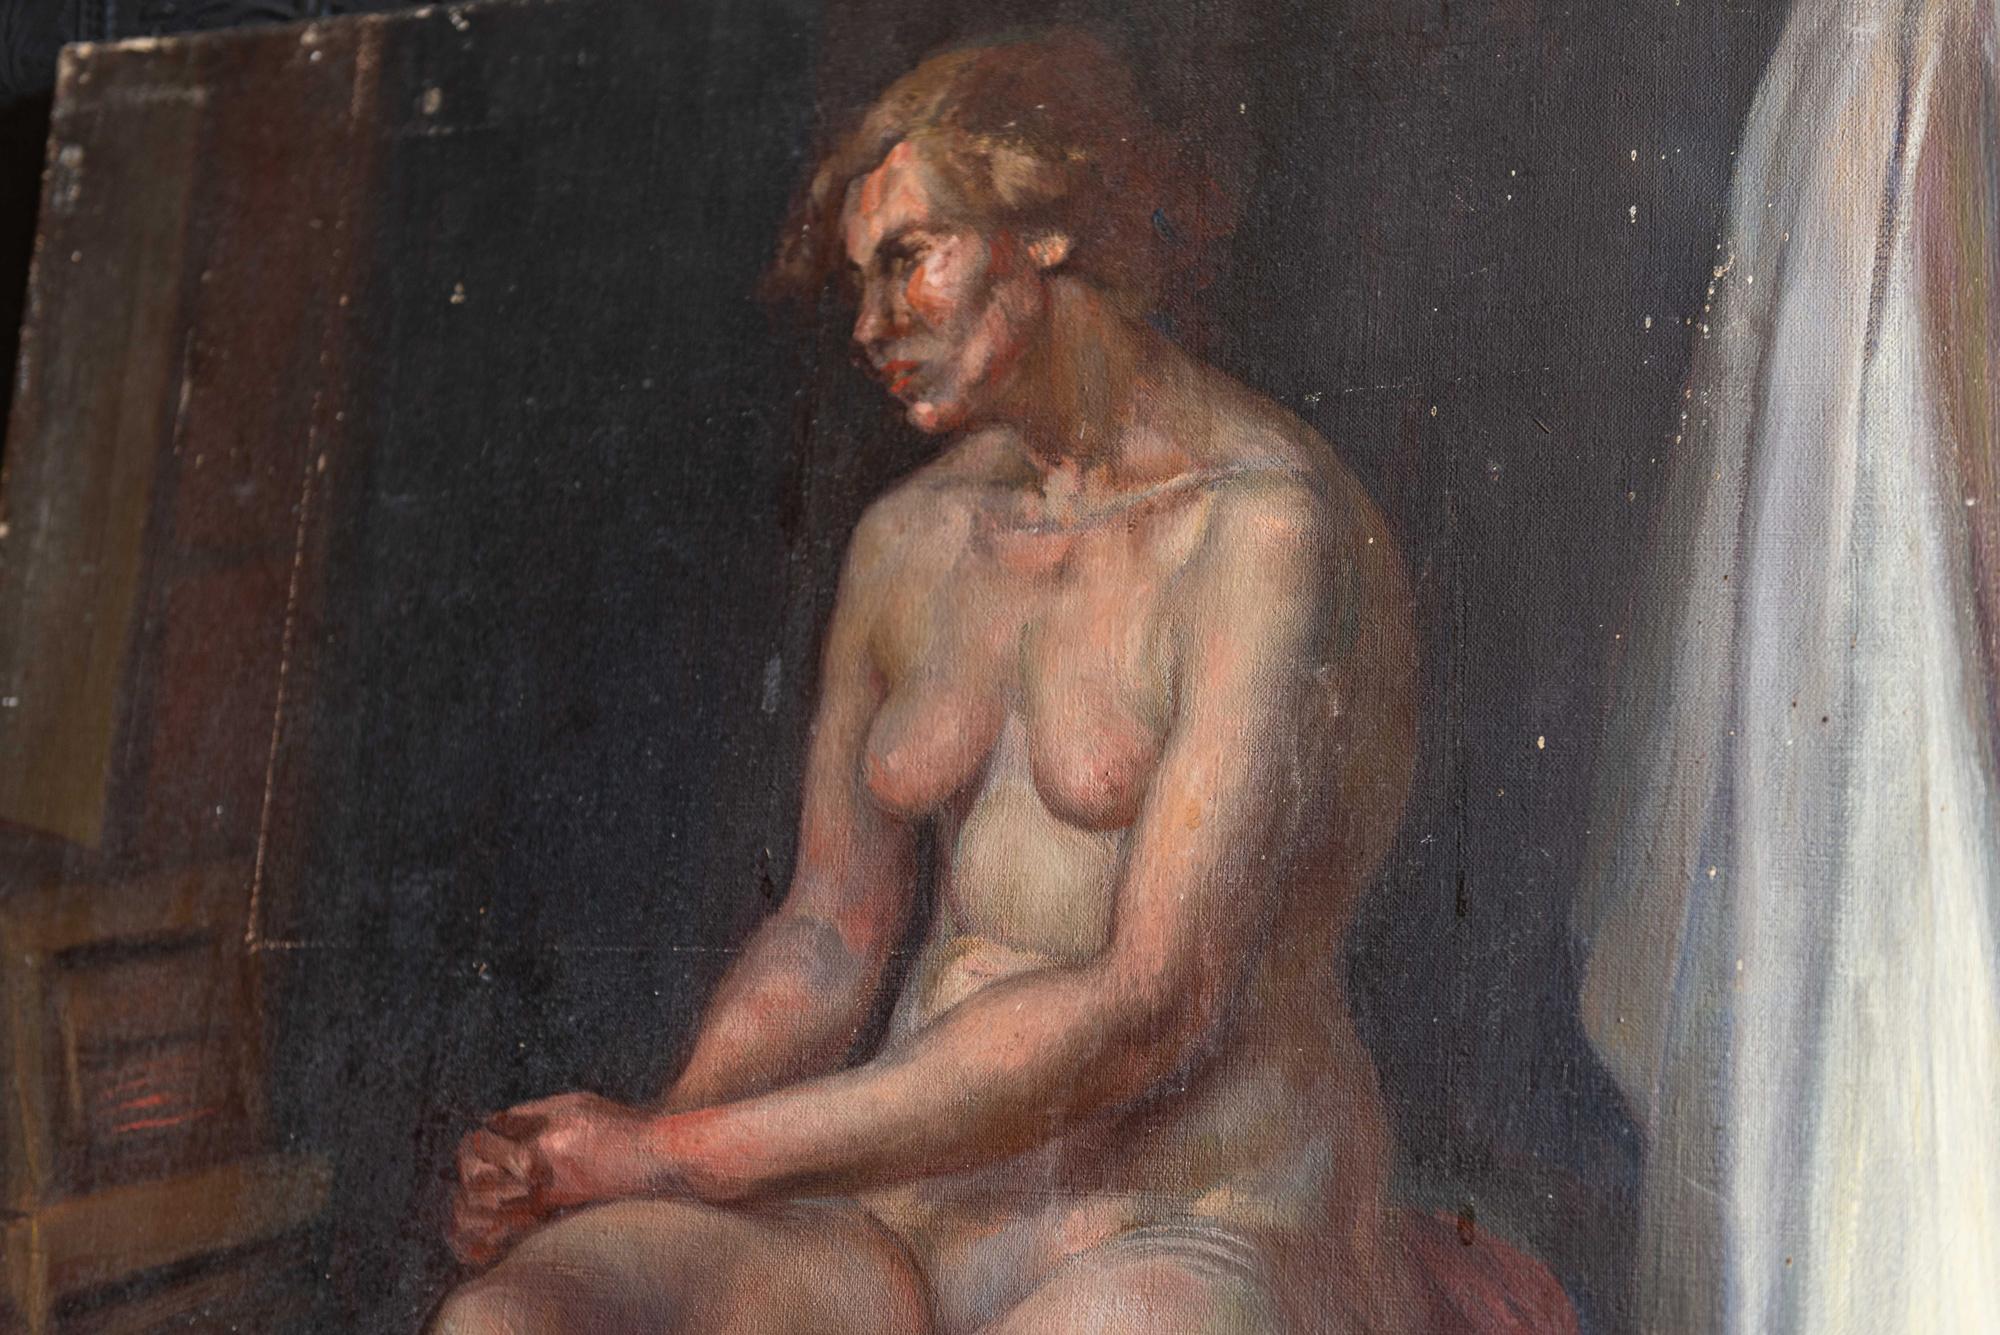 Alys Woodman 'Painting From Life' nude oil painting,
circa 1955.

Attributed to Alys Woodman 'Painting From Life' nude oil on canvas

Alys Louise Woodman (1897-1987) was a student of the Malvern school of arts and exhibited under the Royal